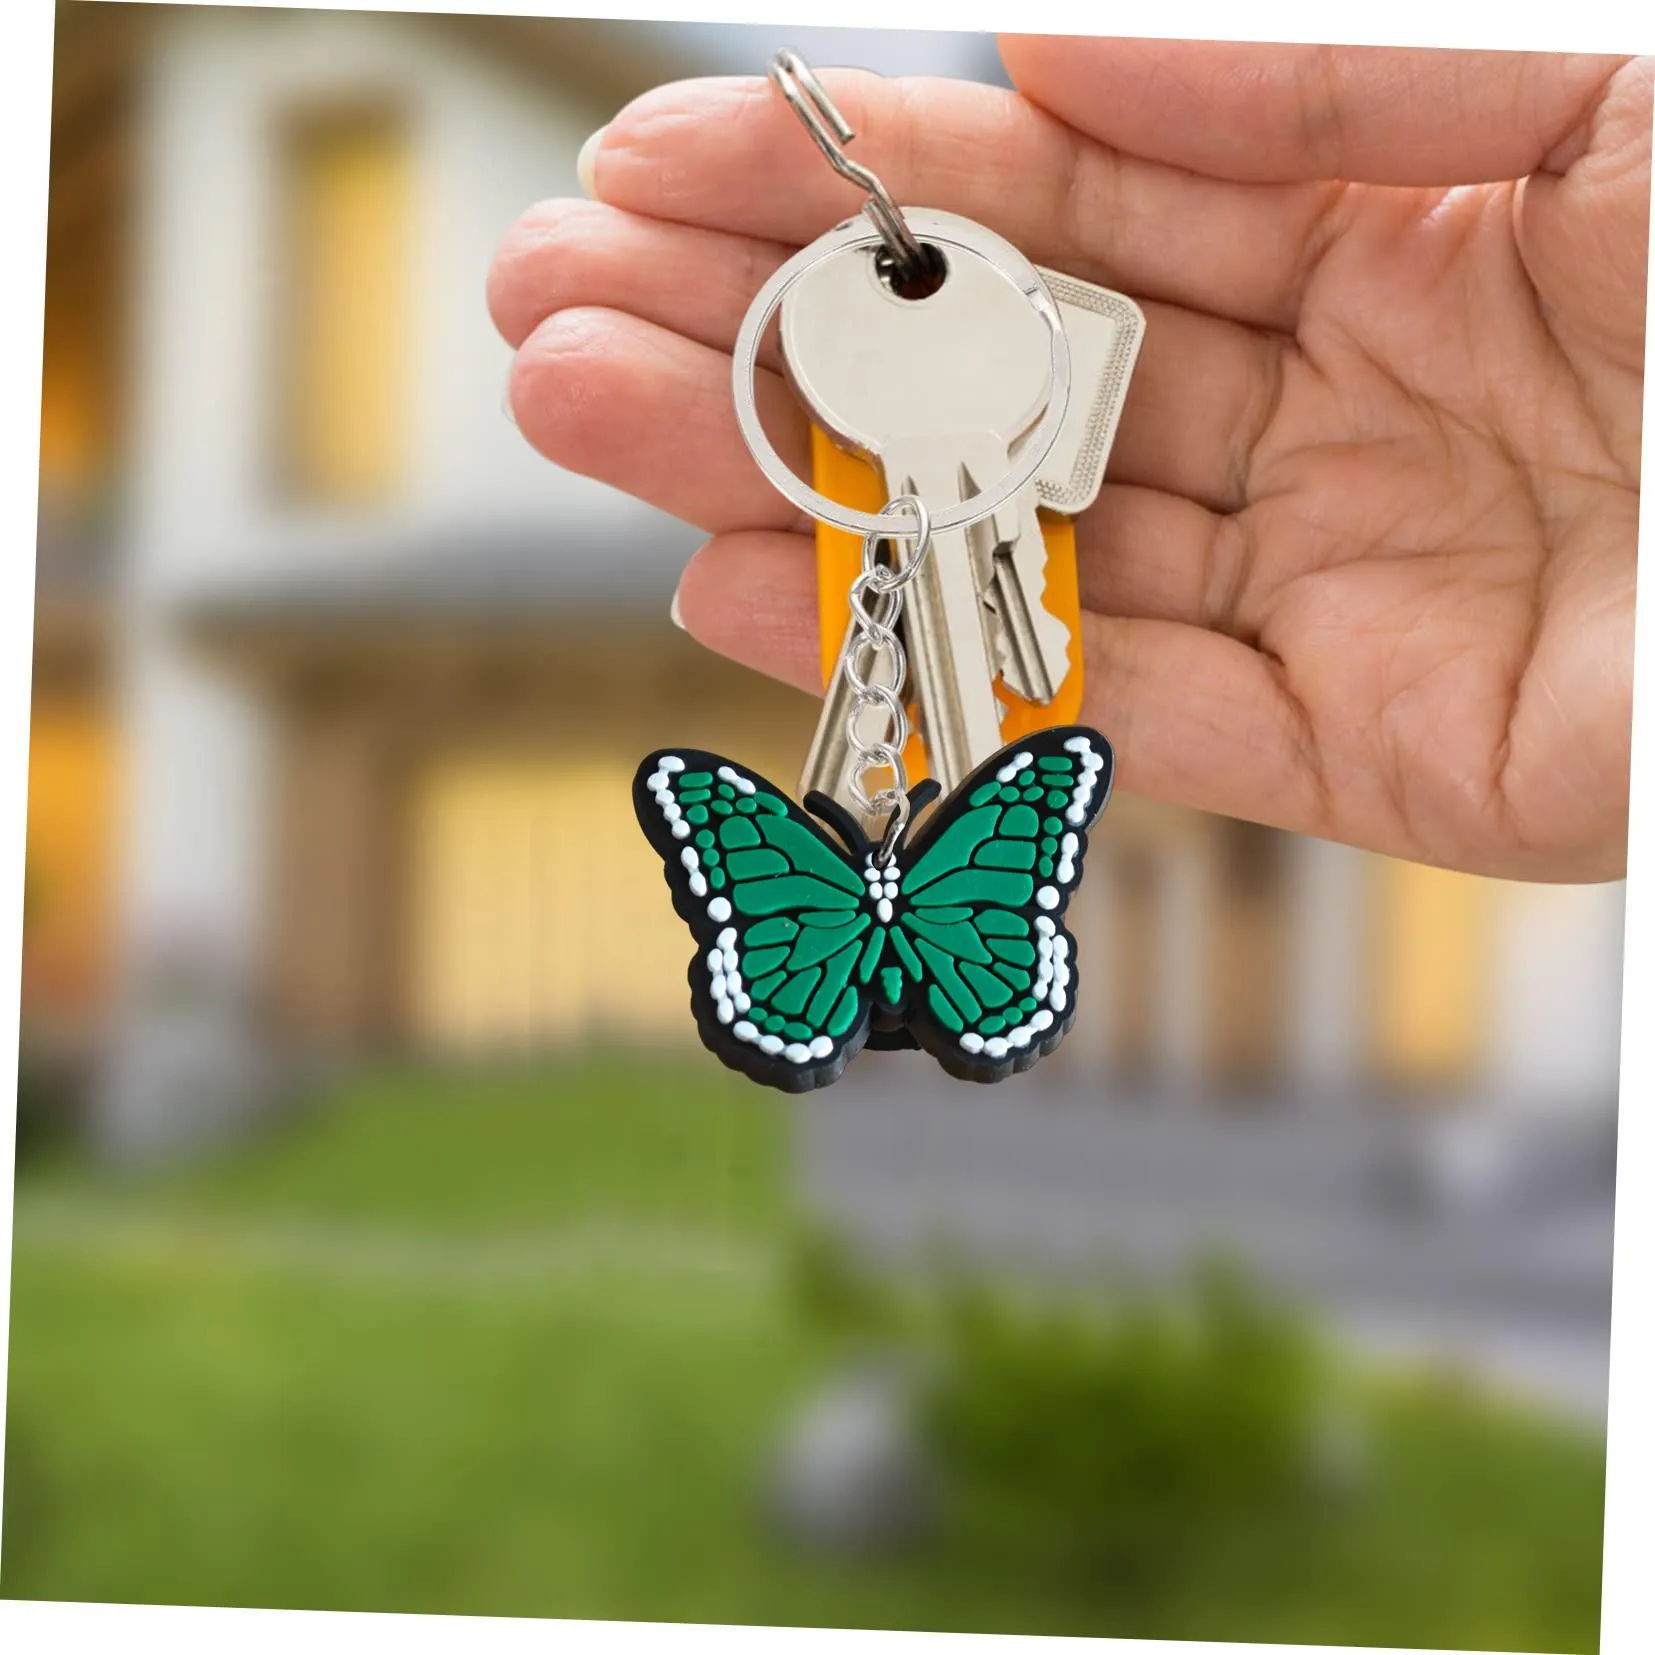 butterfly keychain key ring for boys keyring school bags backpack goodie bag stuffers supplies suitable schoolbag birthday christmas party favors gift shoulder pendant accessories charm keychains tags stuffer gifts and holiday charms